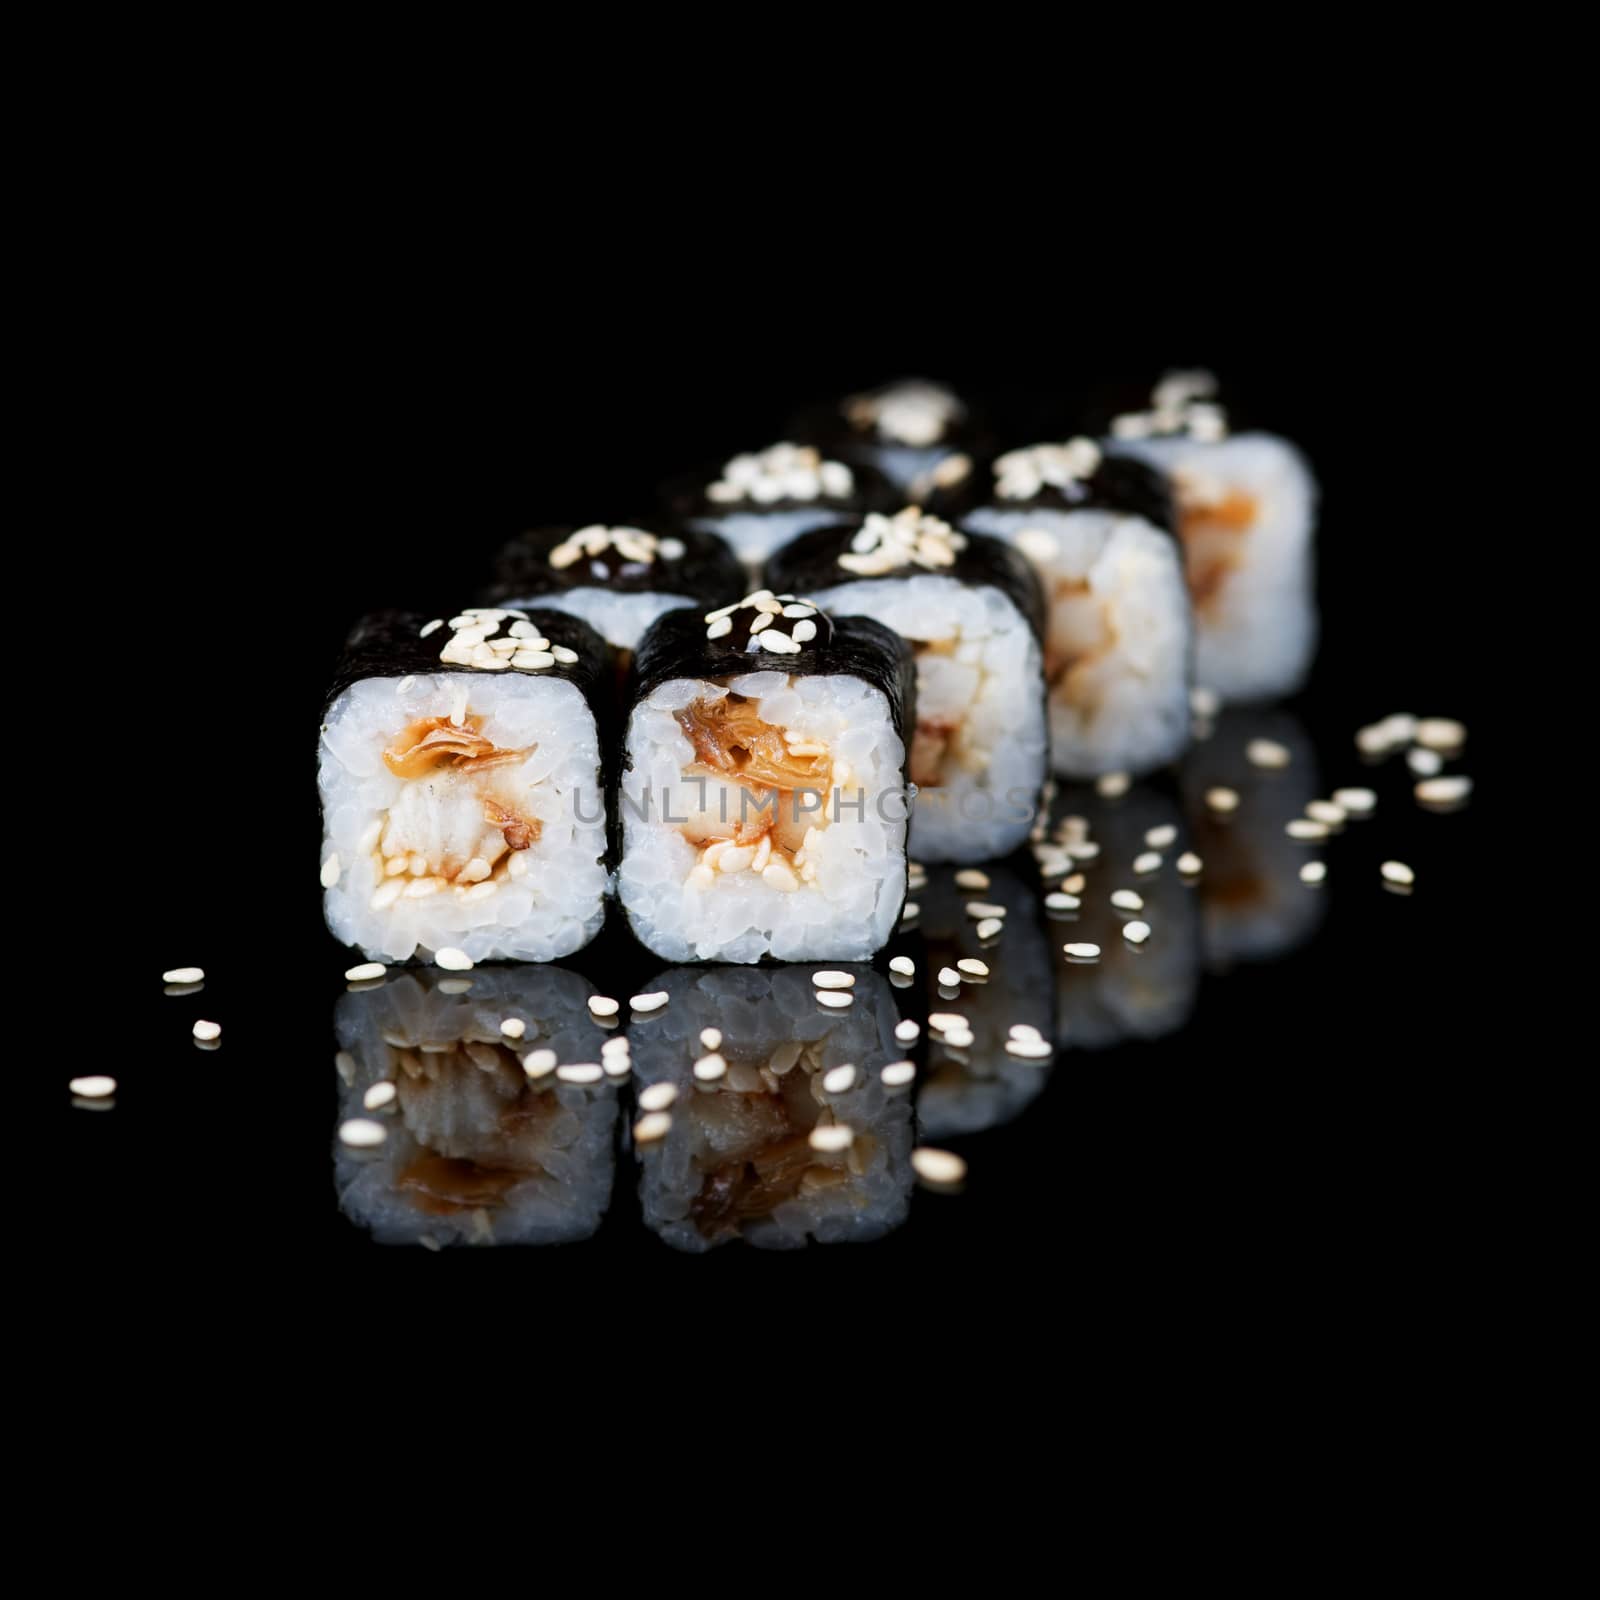 Sushi rolls with eel and sesame by kzen